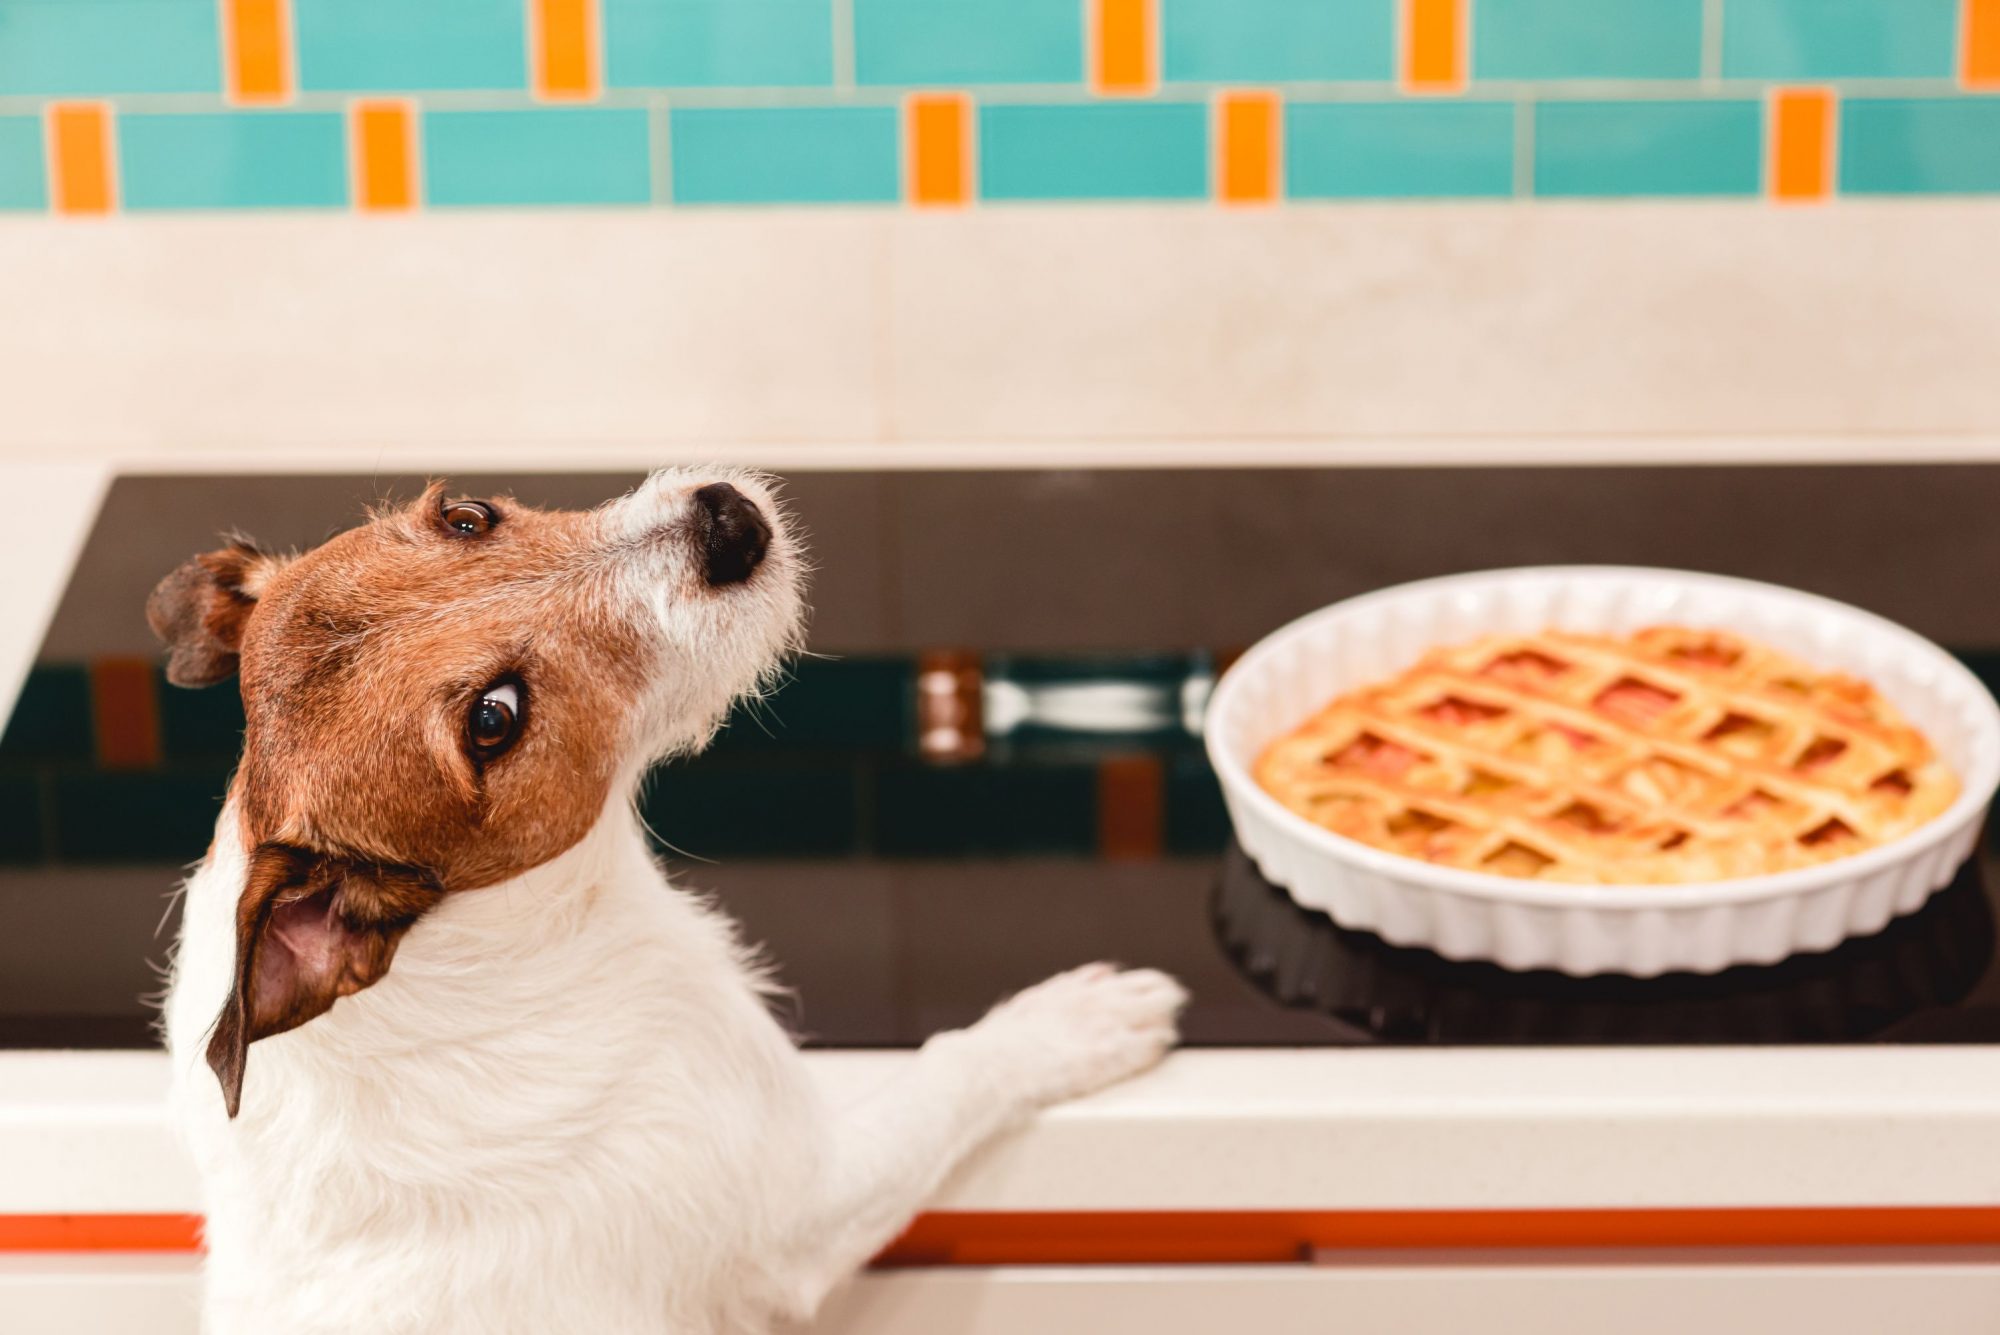 Cute dog caught eating pie.